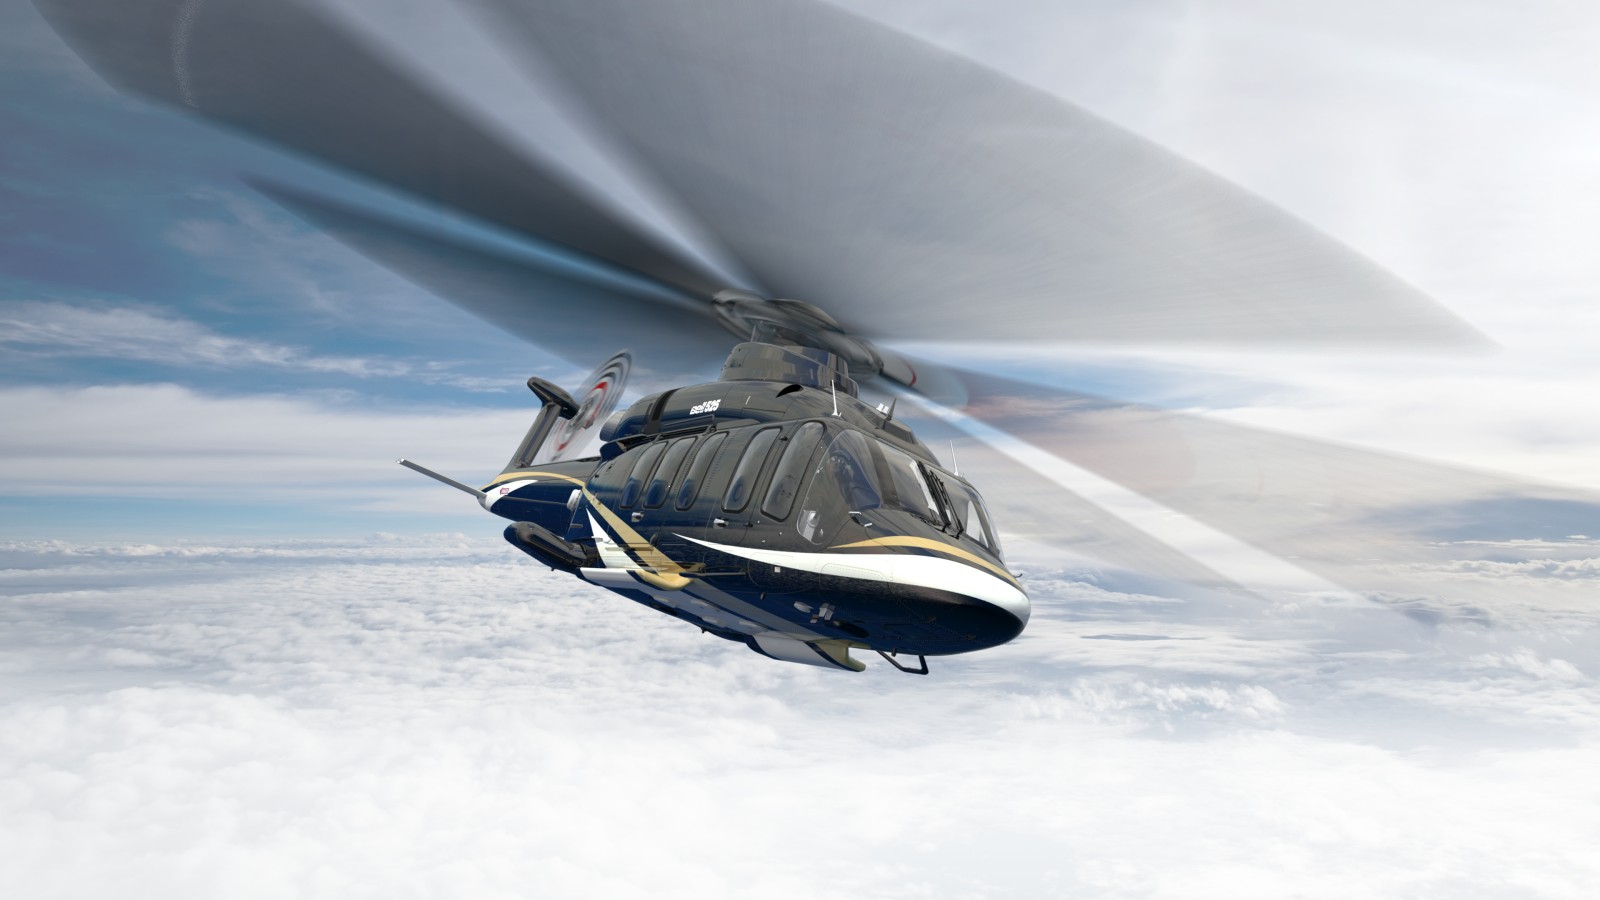 360 VR Virtual Tours of the Bell 525